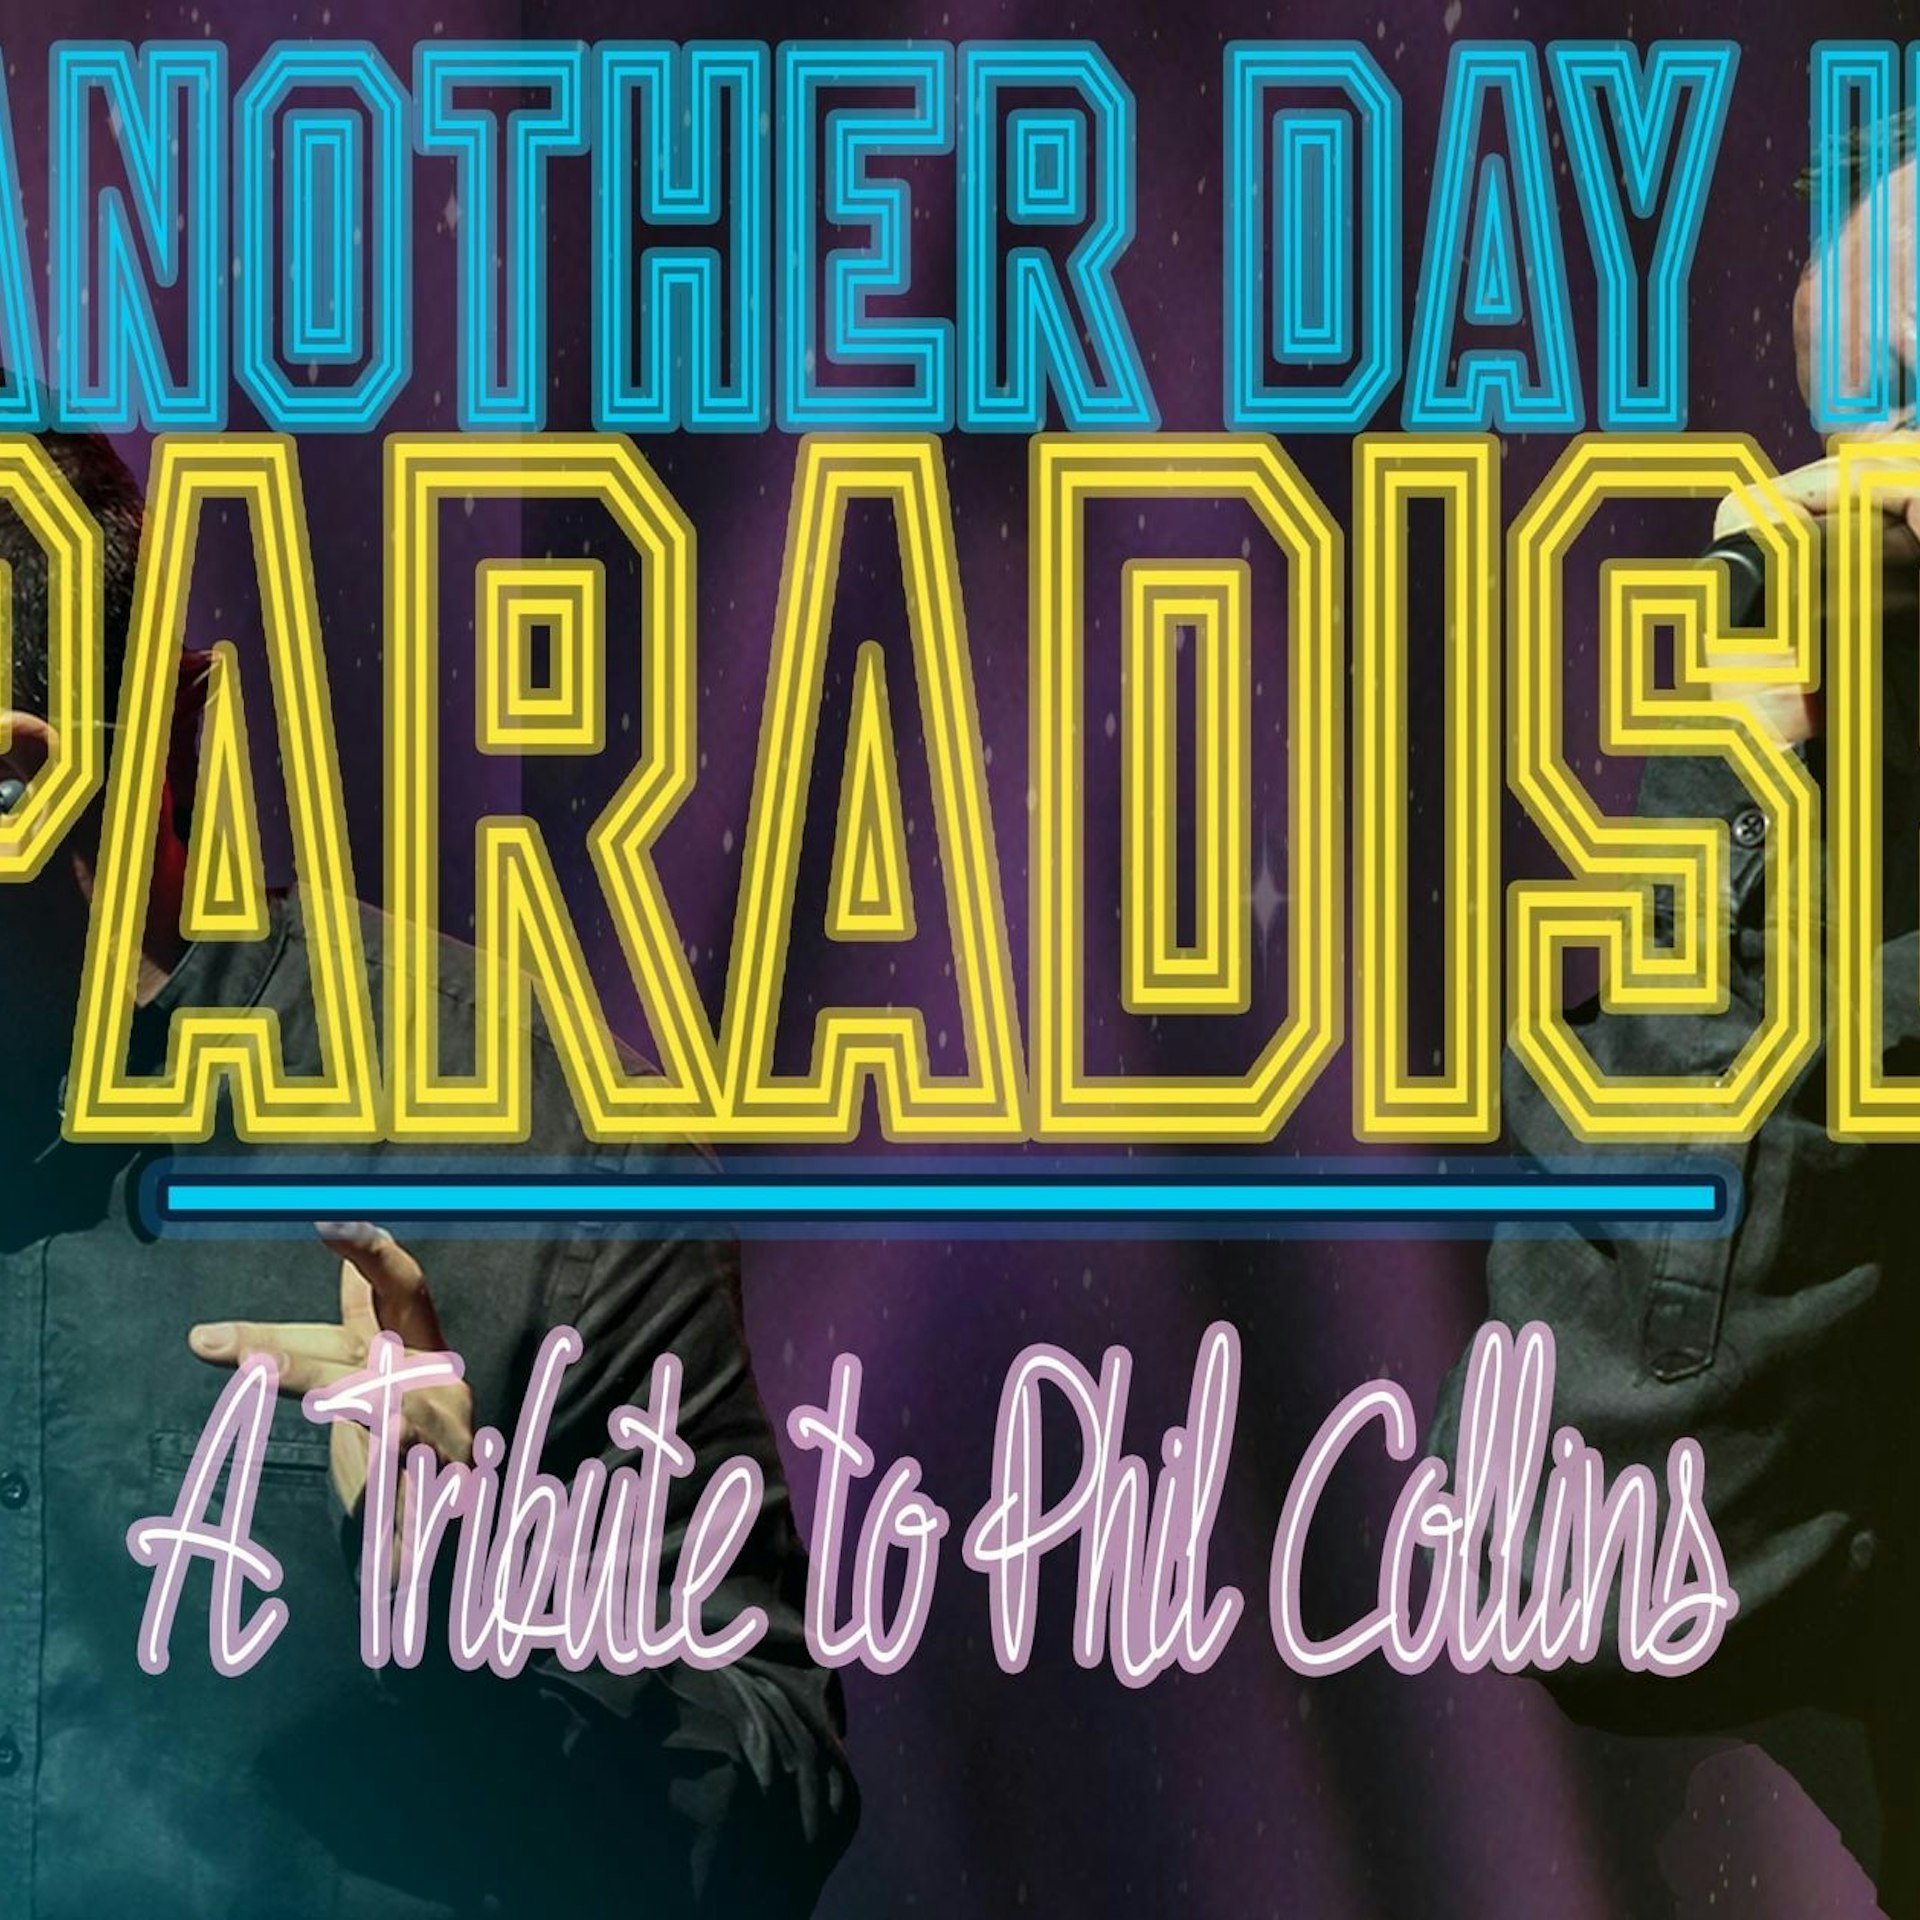 Phil Collins - Another Day in Paradise (Tradução